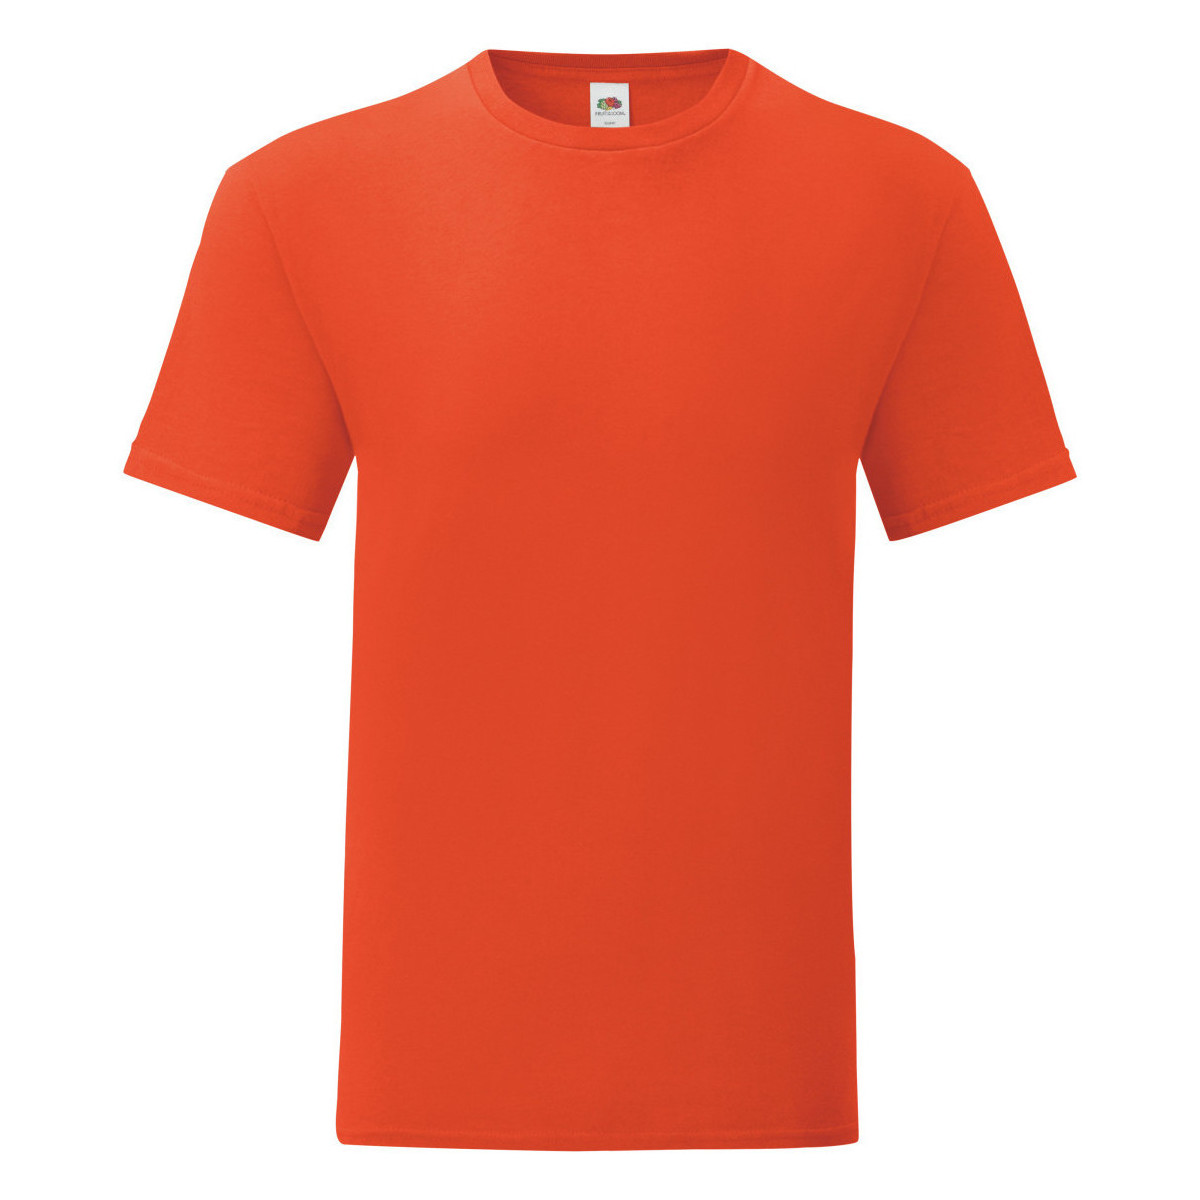 Vêtements Homme T-shirts manches longues Fruit Of The Loom Iconic 150 Orange